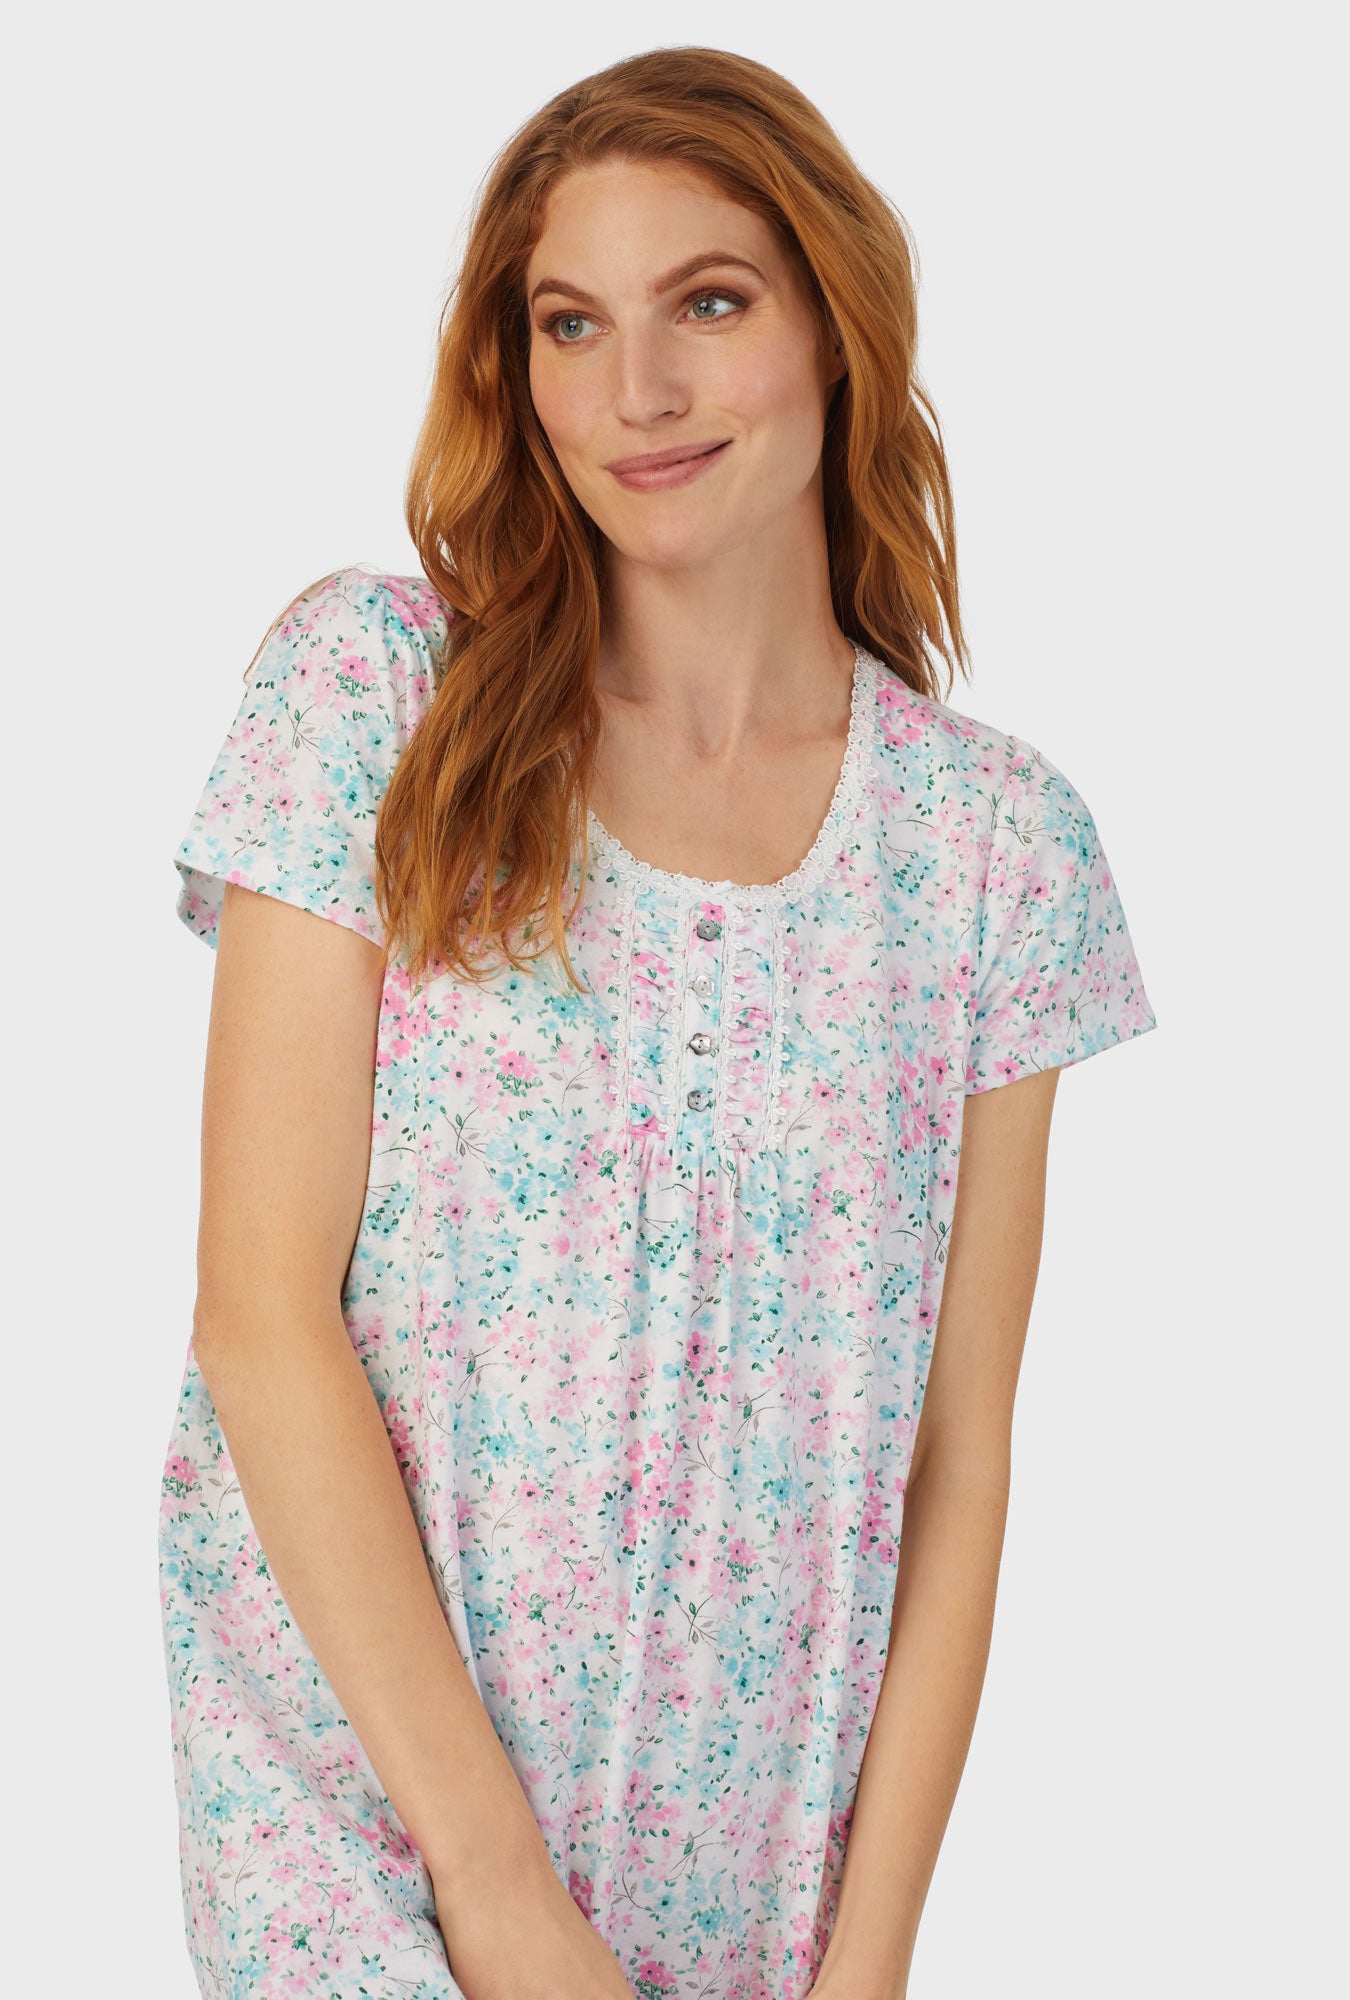 A lady wearing white cap sleeve nightshirt with aqua and pink floral print.